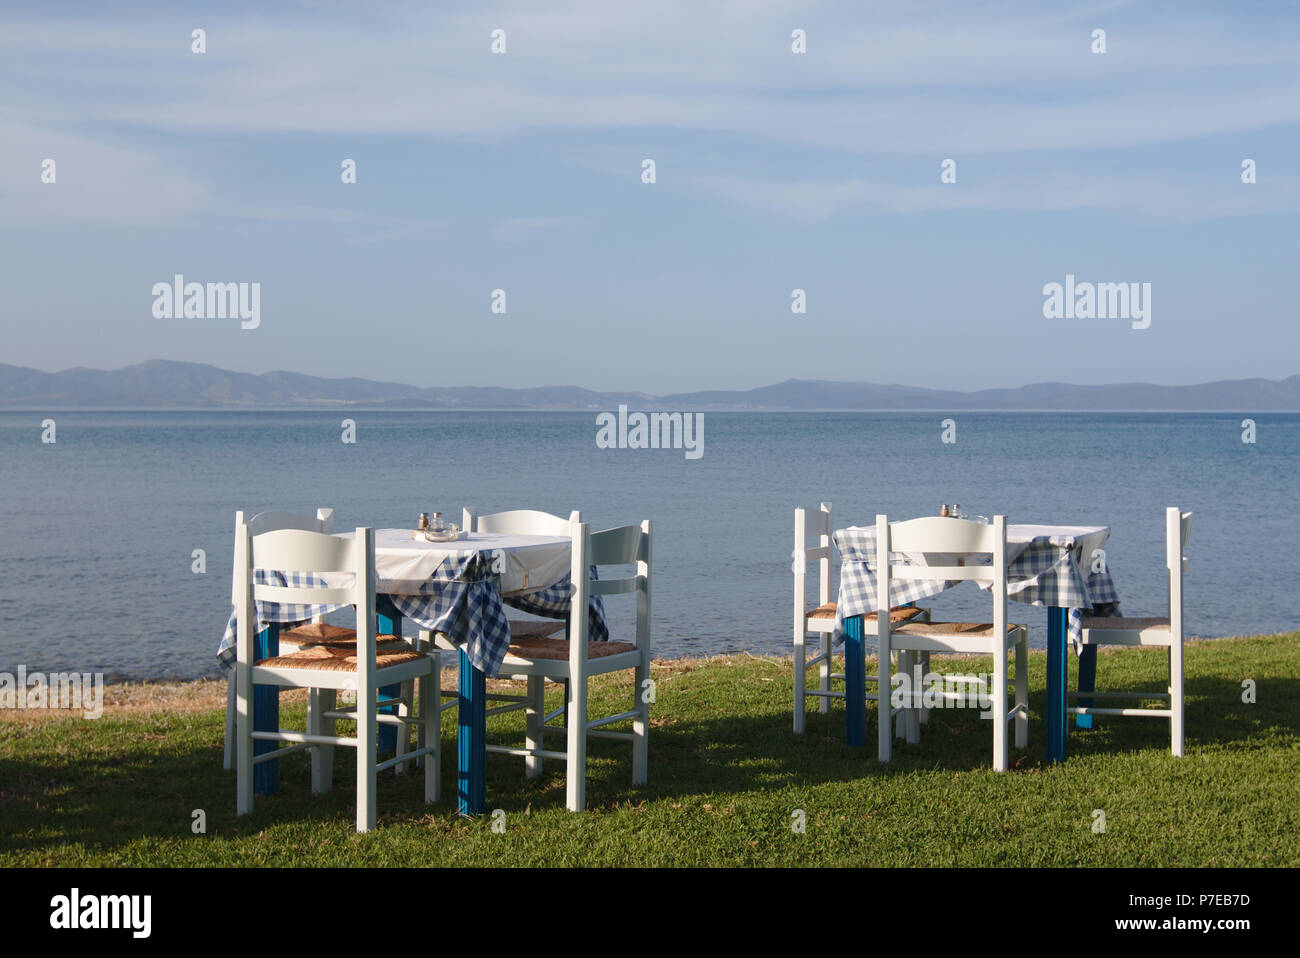 Restaurant tables set at the beach, overlooking Turkish shore Stock Photo